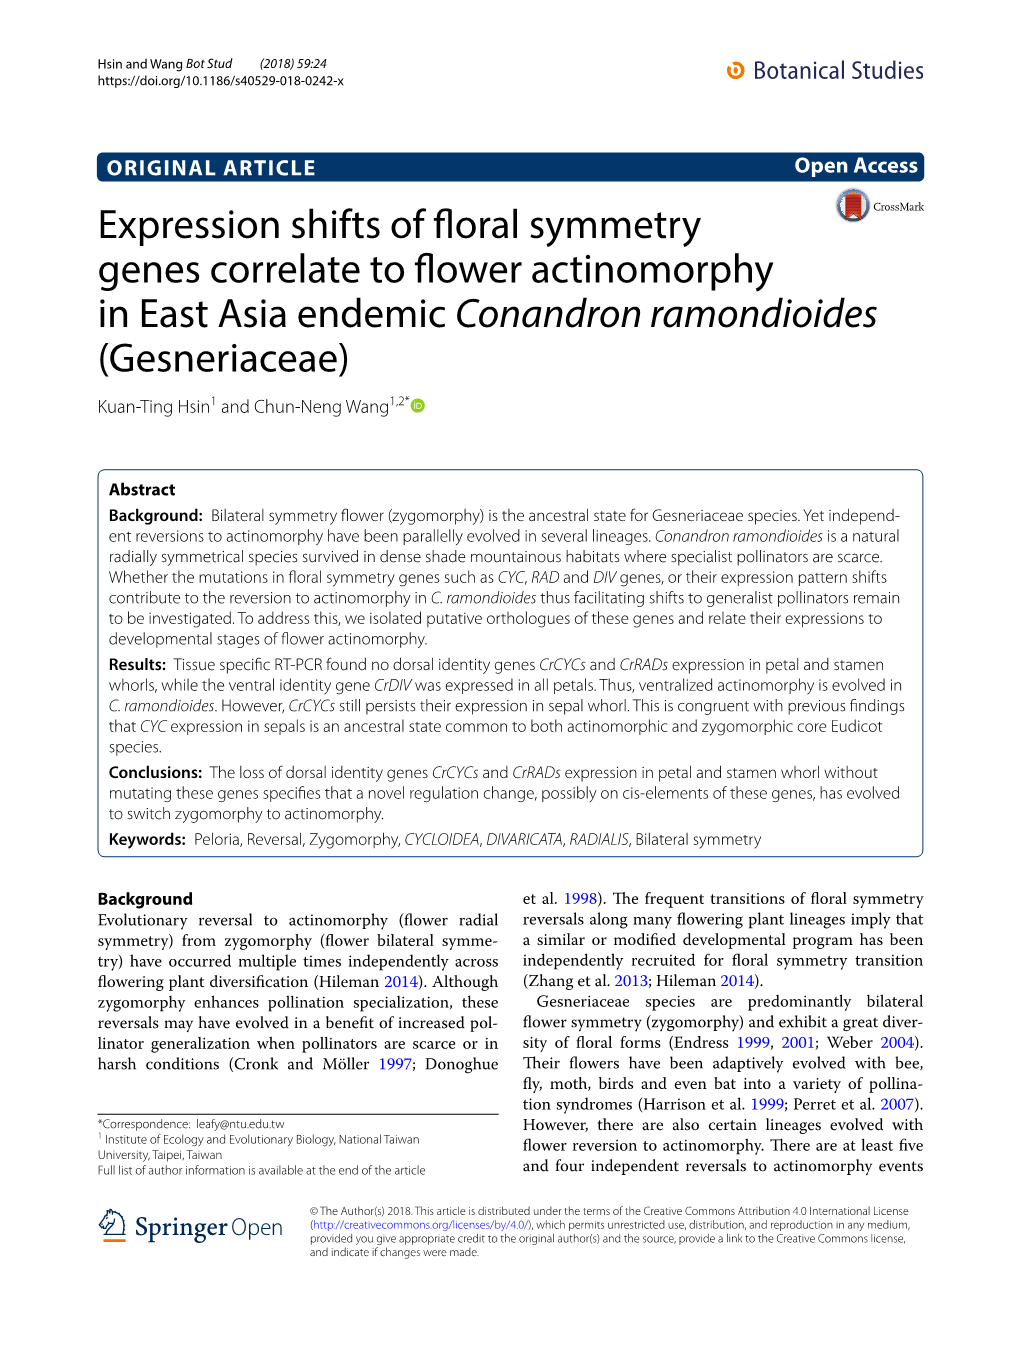 Expression Shifts of Floral Symmetry Genes Correlate to Flower Actinomorphy in East Asia Endemic Conandron Ramondioides (Gesneri